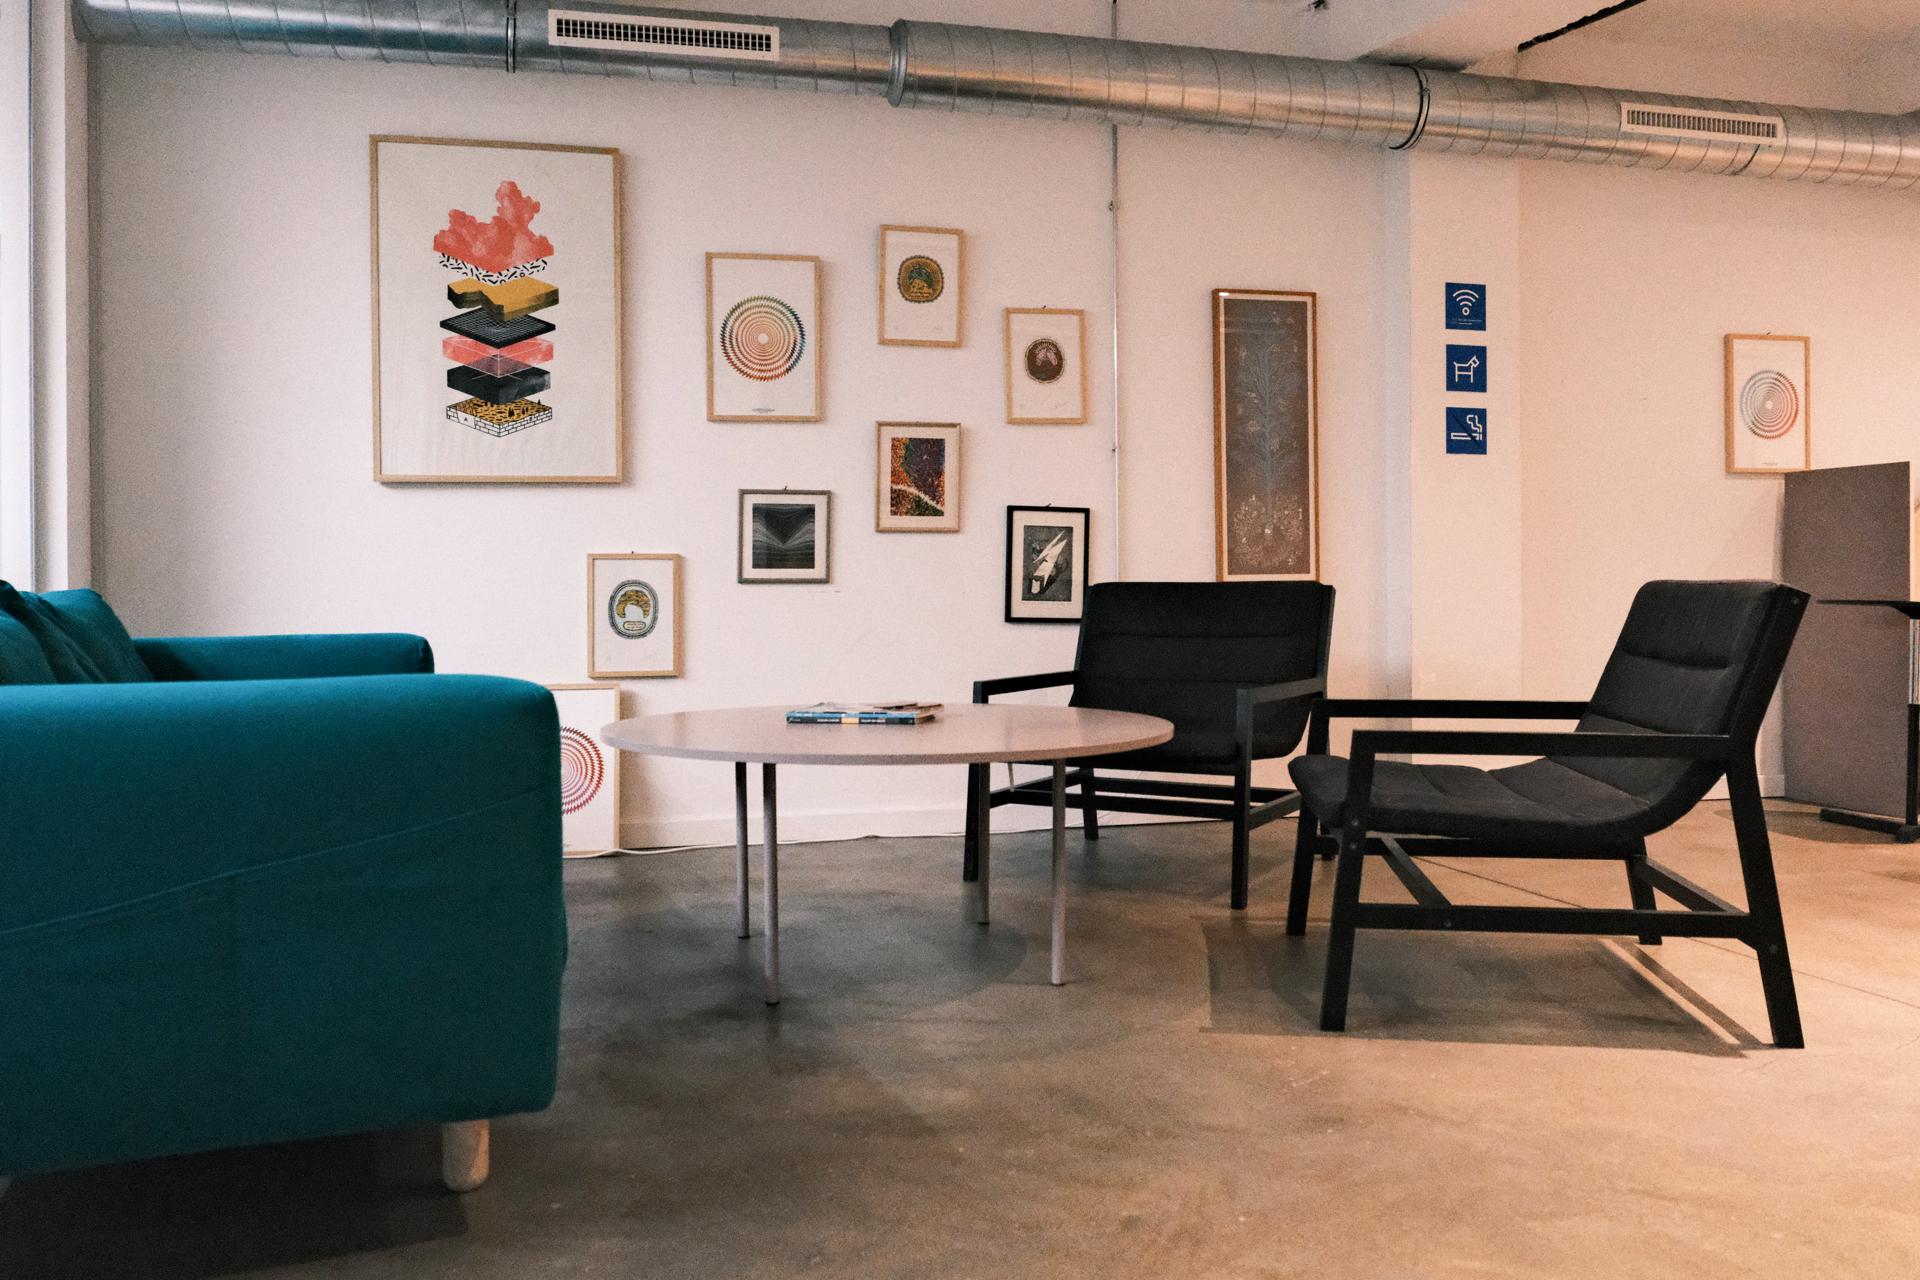 3 Reasons in Favor of Coworking Spaces (And One Against)